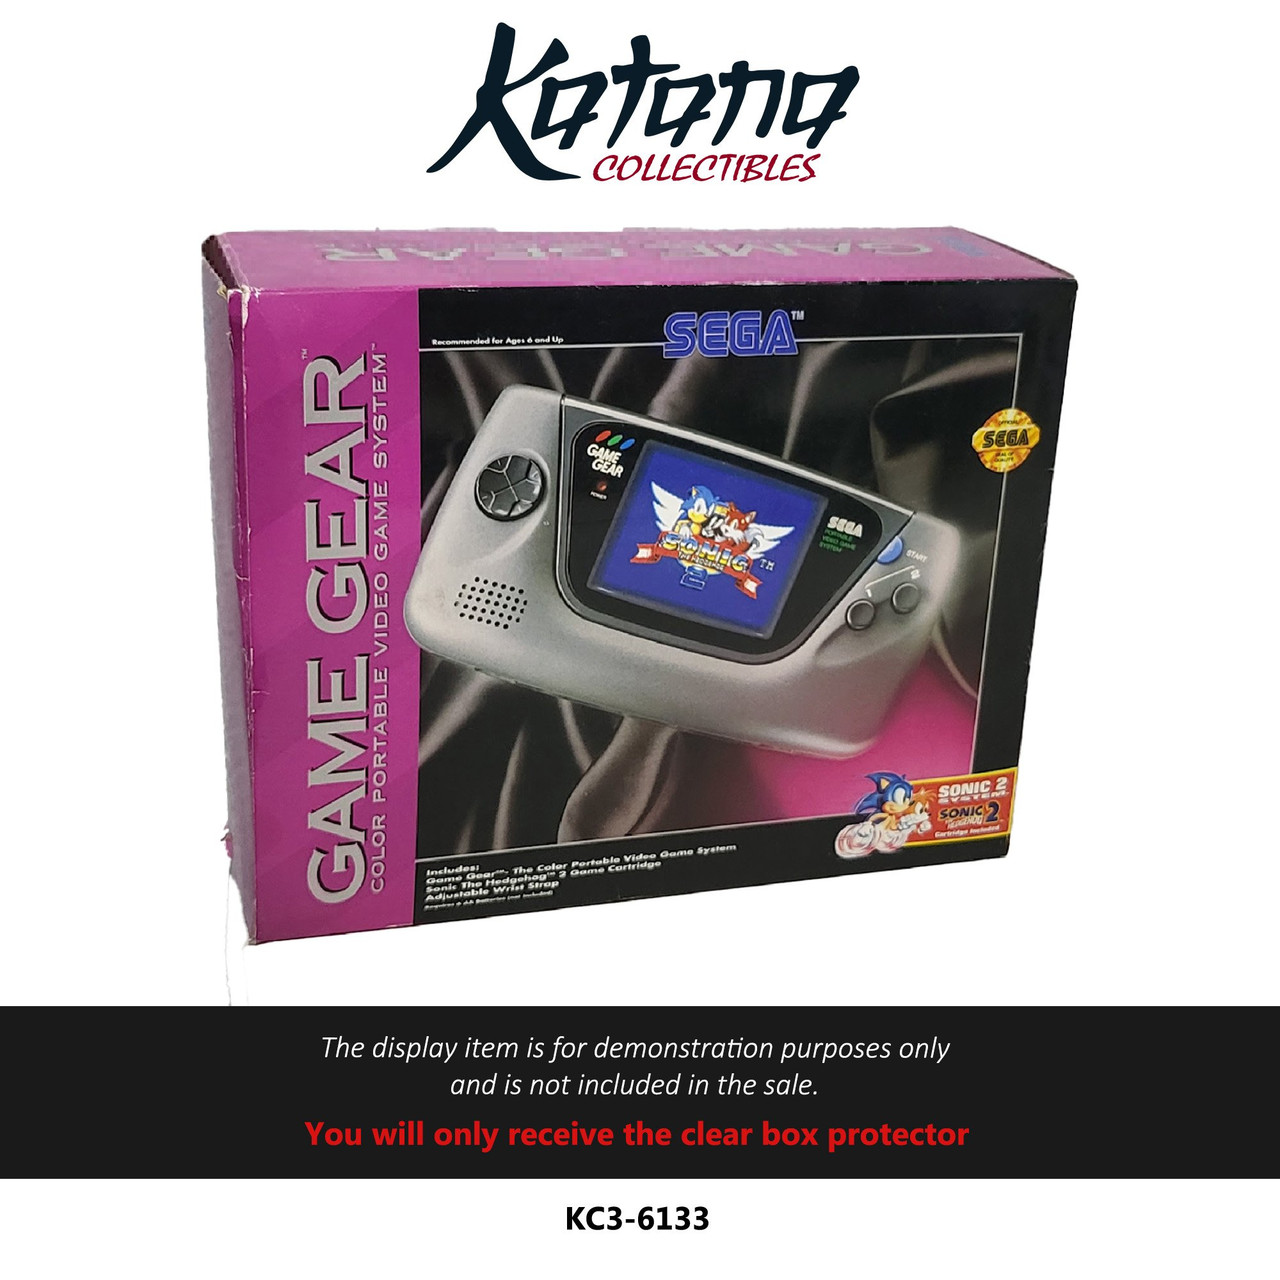 Katana Collectibles Protector For SEGA Game Gear Color Portable Video Game System With Sonic 2 The hedgehog Cartridge